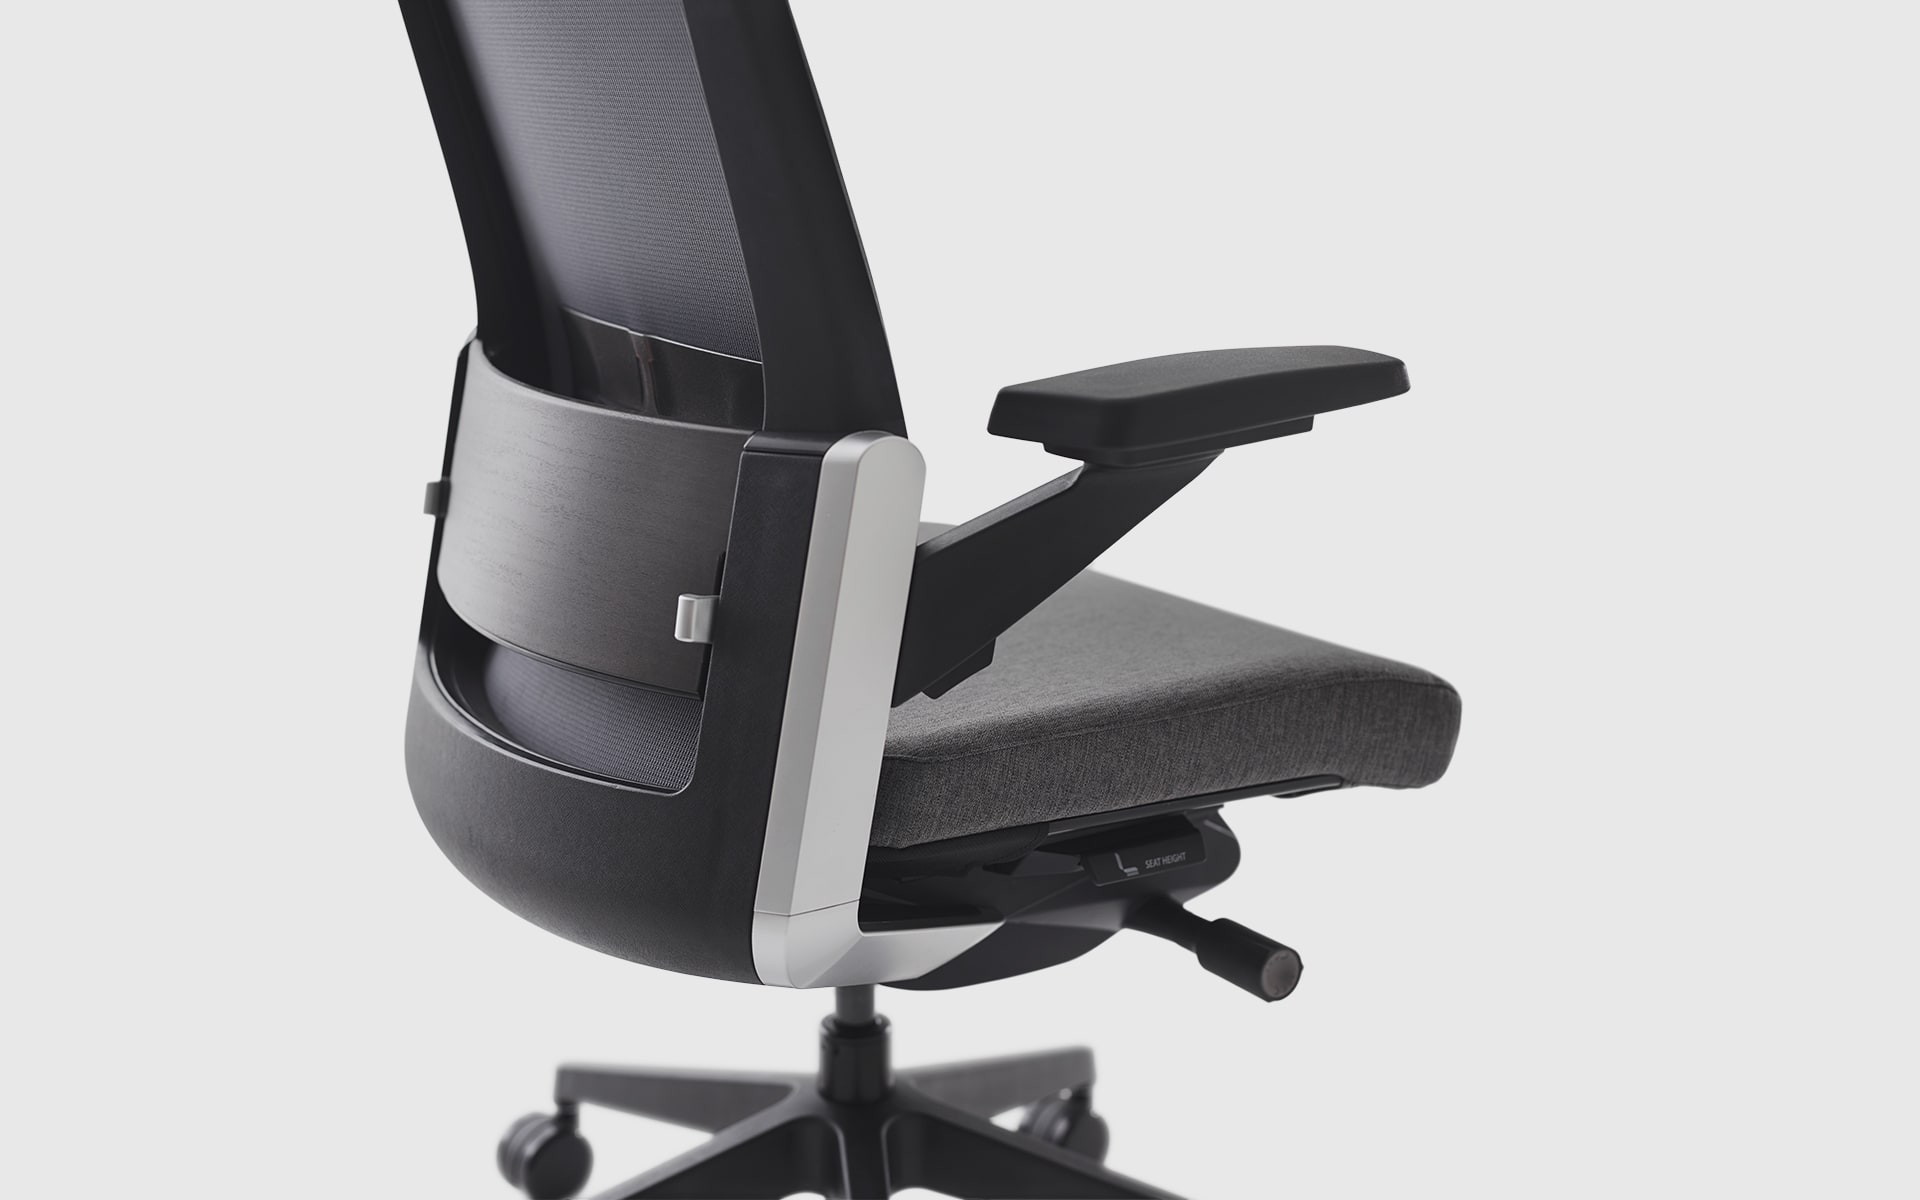 Close-up of the Sidiz T80 executive office chair by ITO Design with gray upholstery